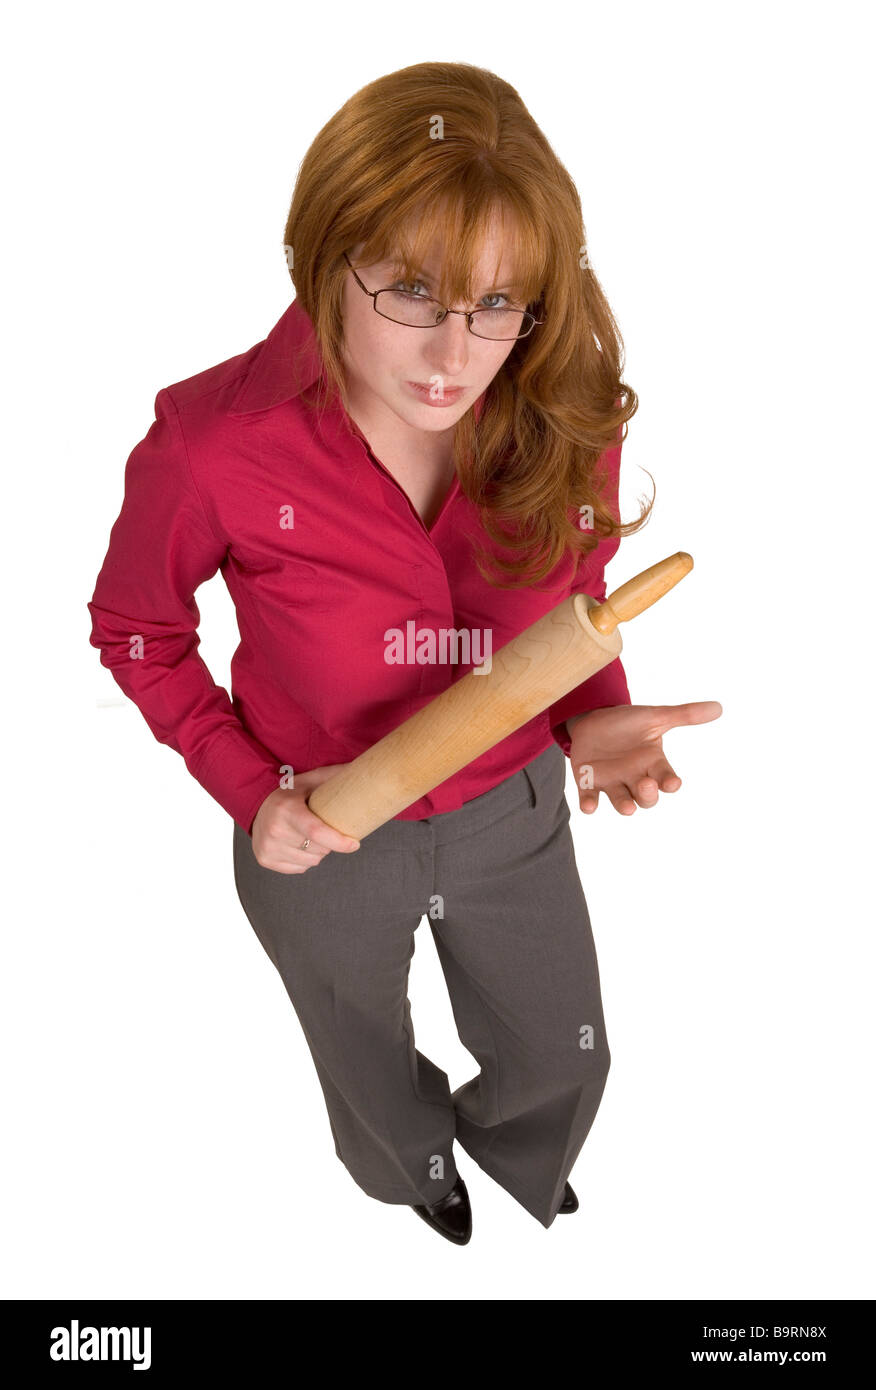 An angry redheaded woman with a wooden rolling pin holing it in a menacing way Stock Photo